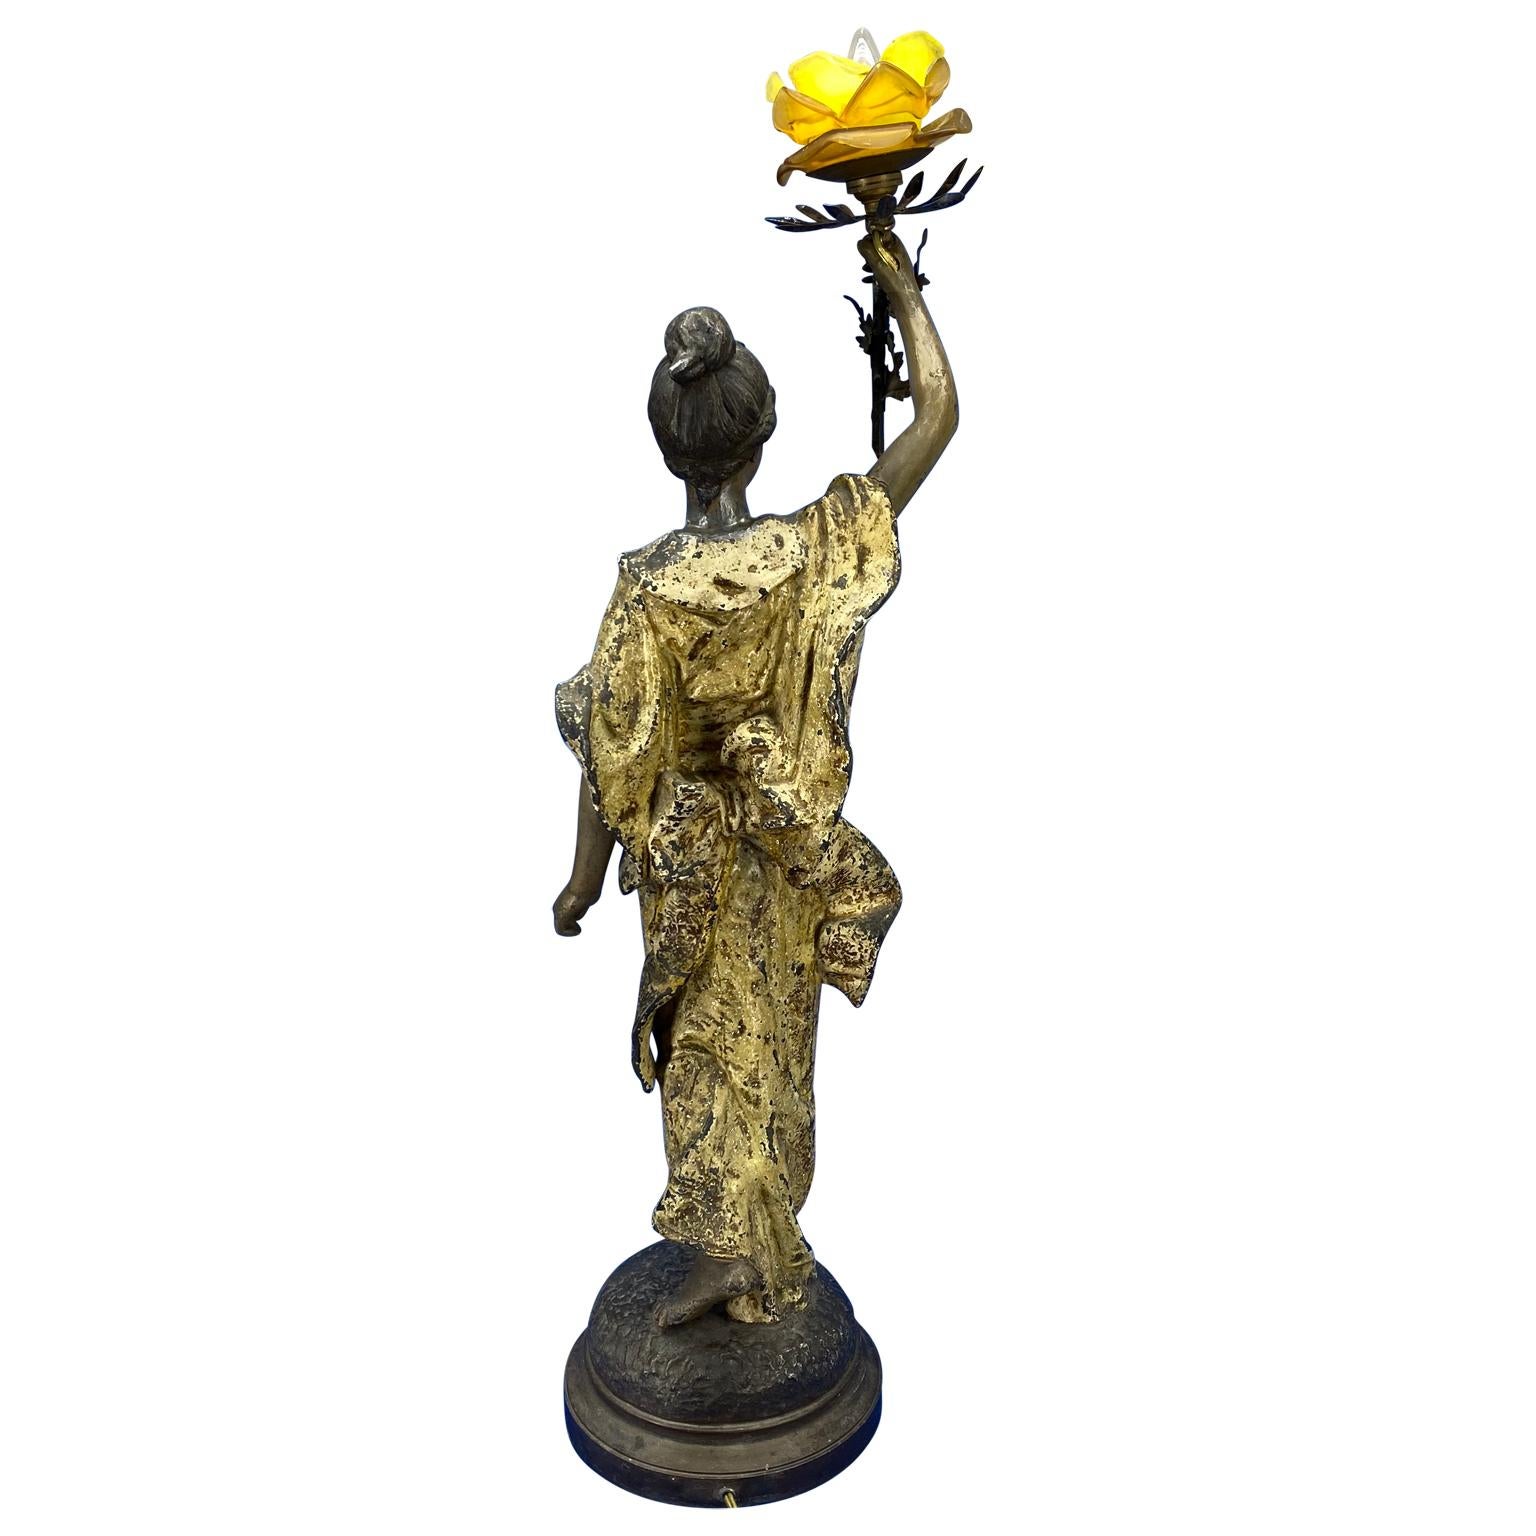 Large French 19th century bronze sculpture of lady with a lit yellow rose glass lamp shade, signed by Pedro Riqual.